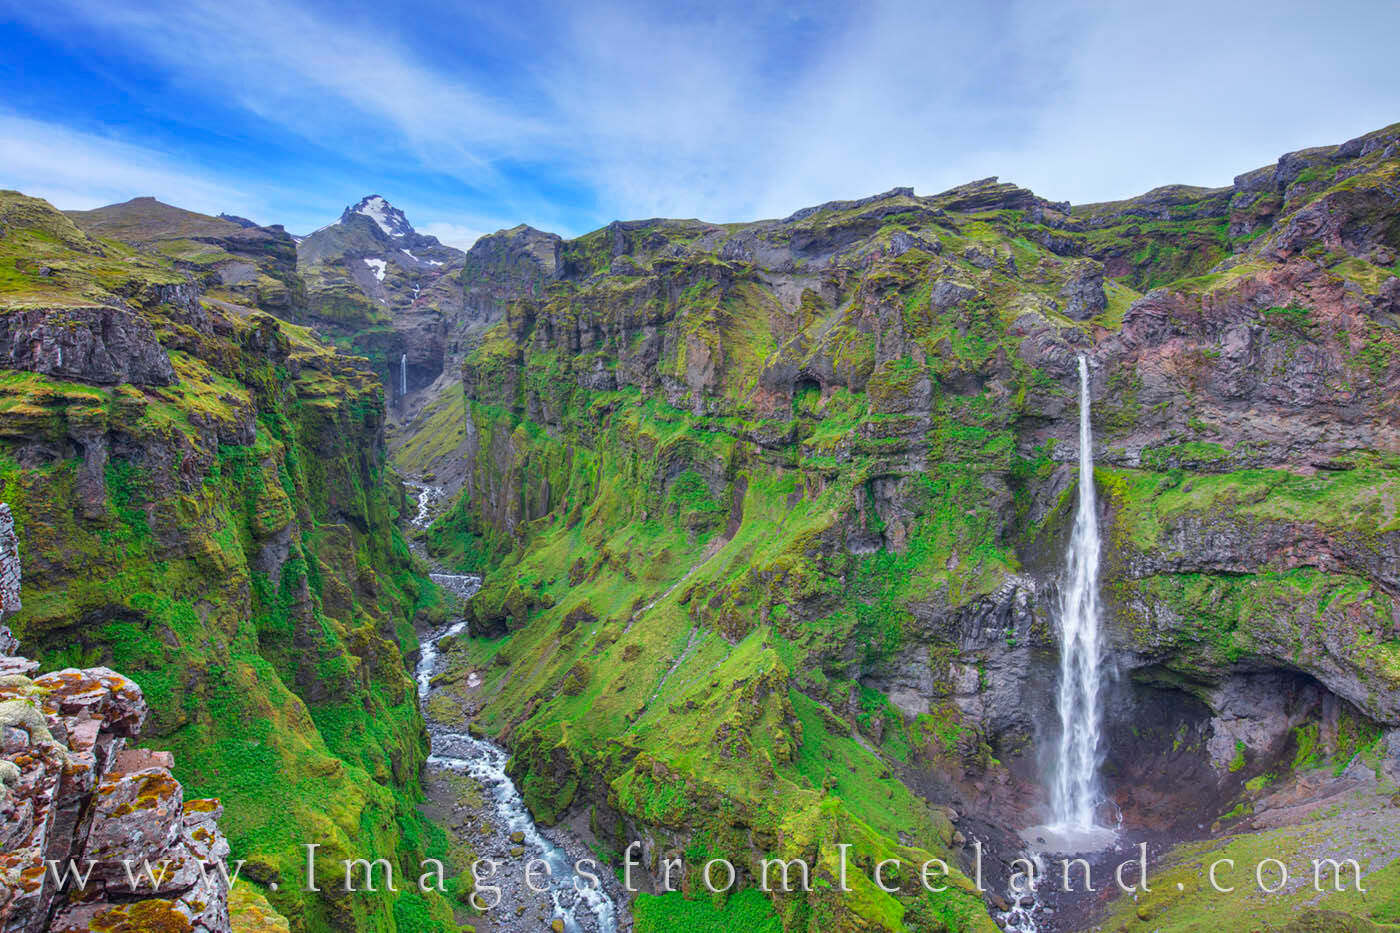 Mulagljufur Canyon is a hidden gem of Iceland - not well known but with a lush valley as is from a fairy tale.